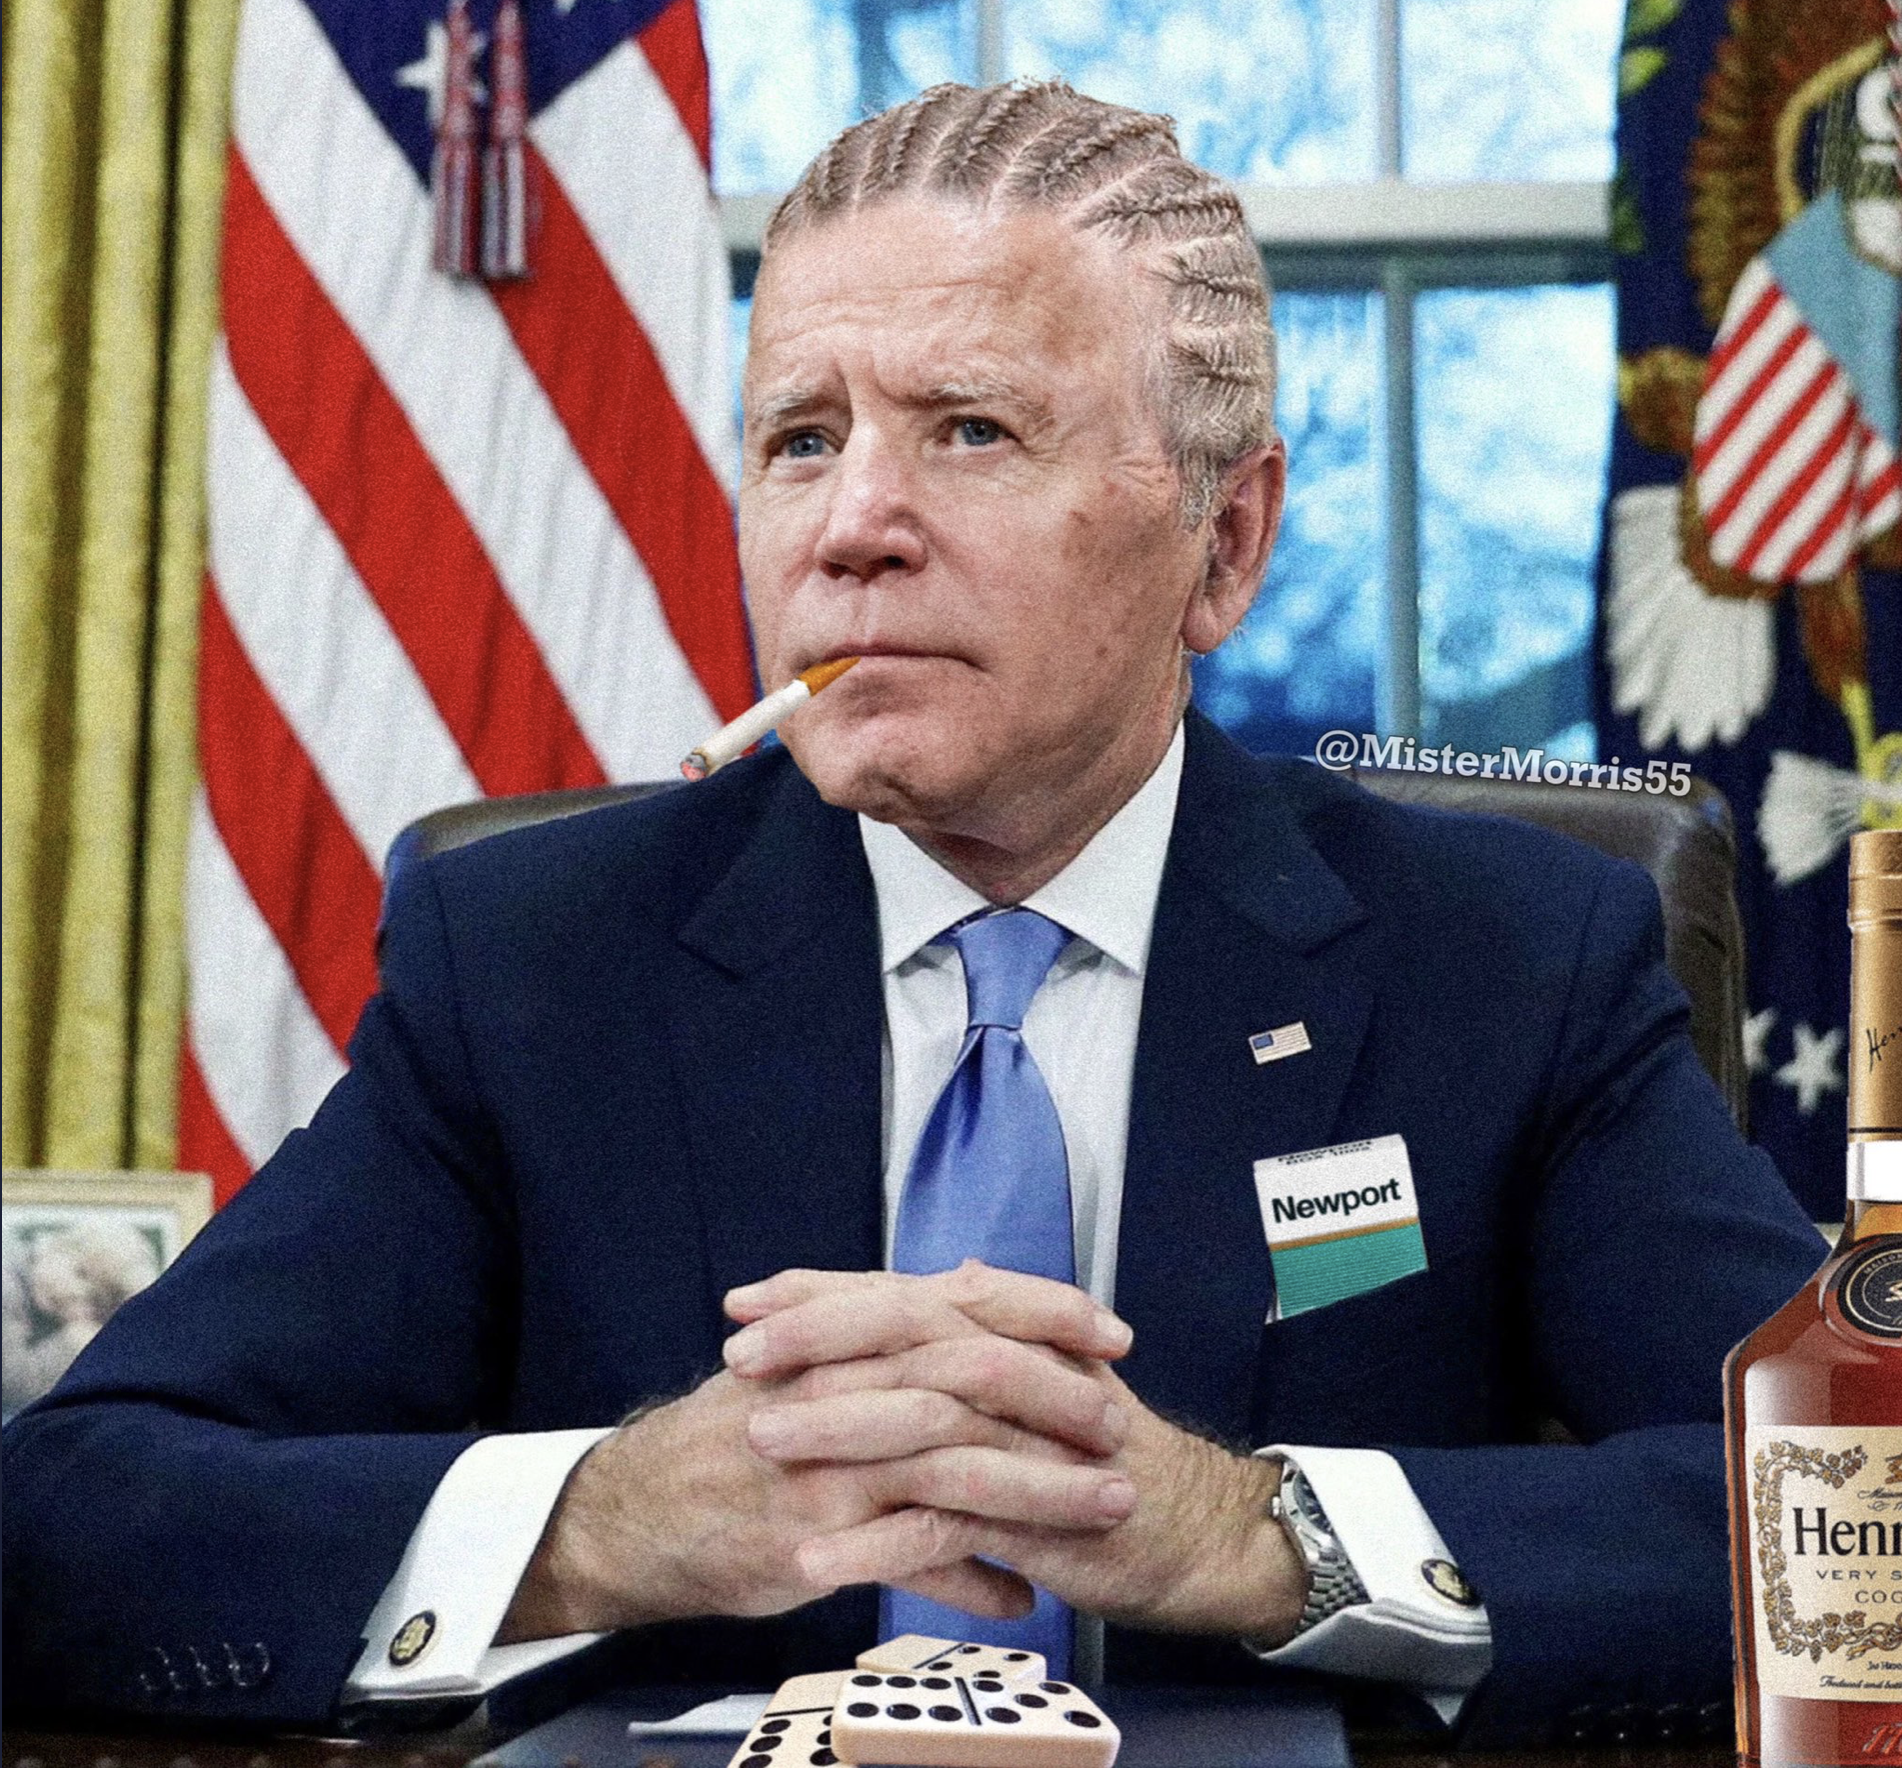 'Moneybagg Joe' Memes Flood the Internet in Response to Stimulus Check